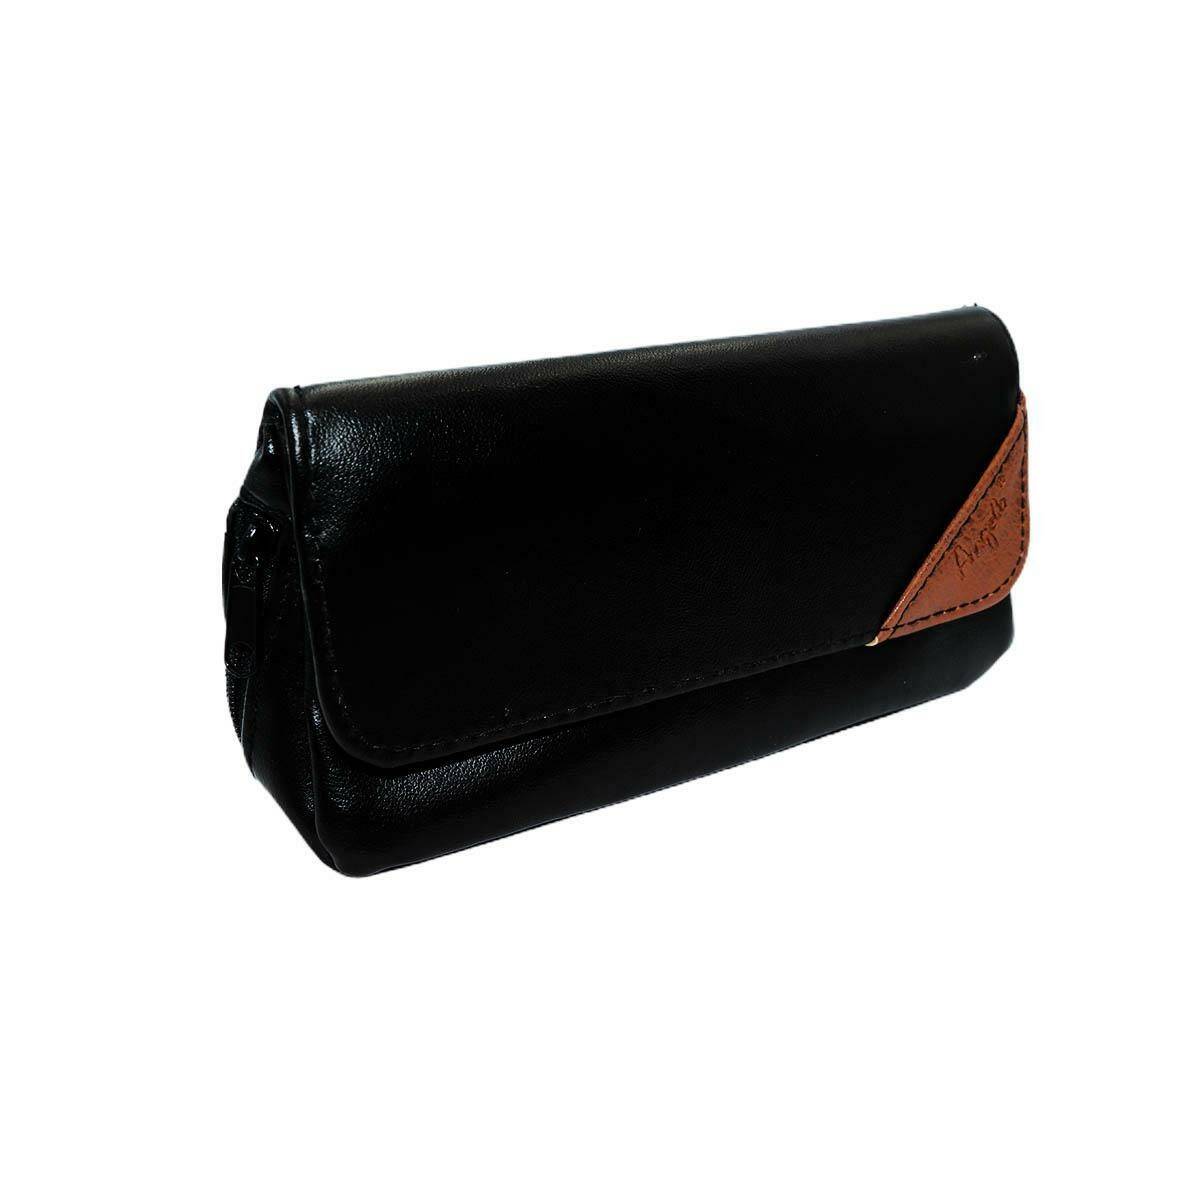 Cases for 2 pipes and tobacco - brown and black, small